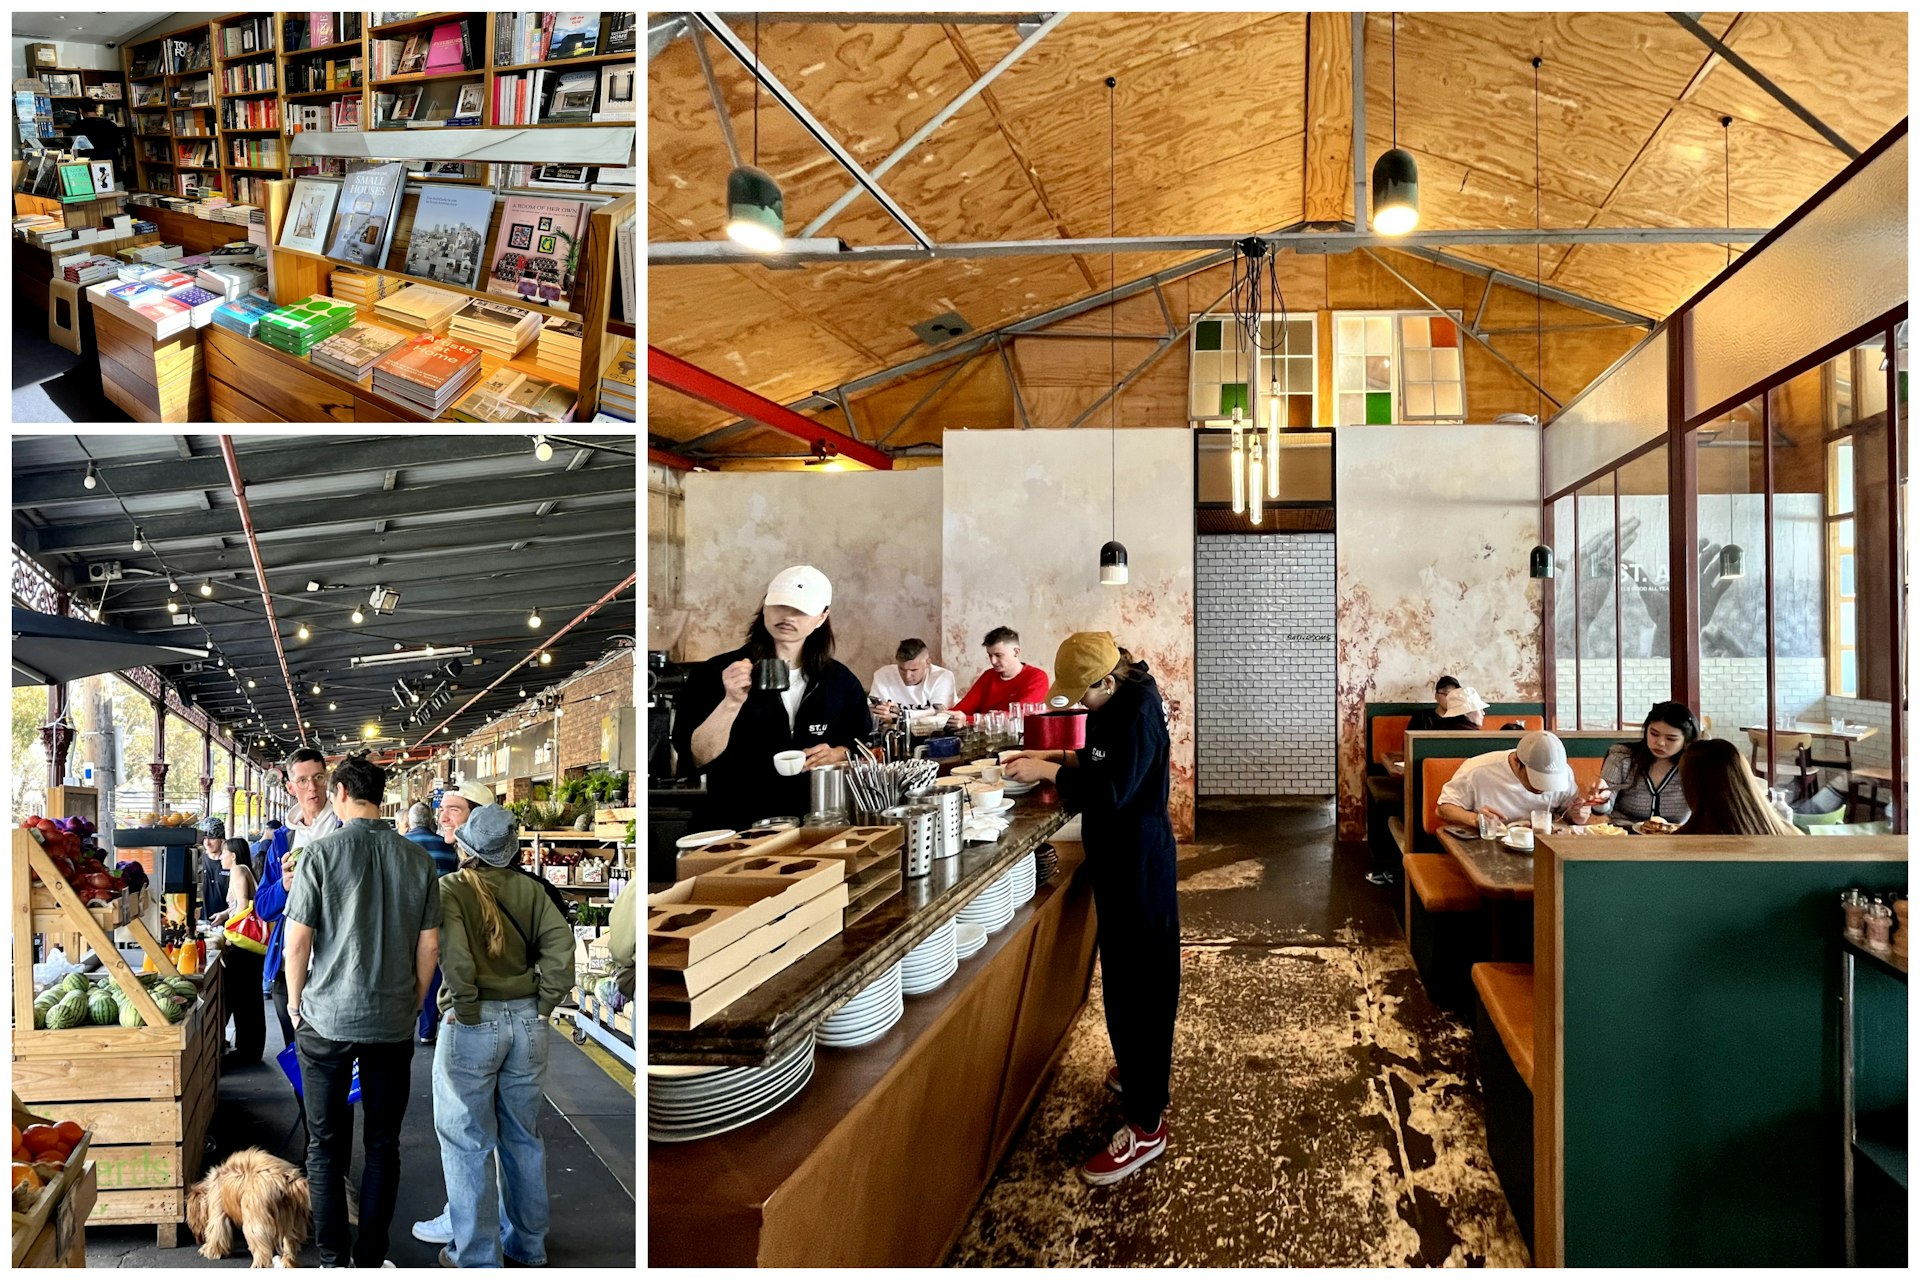 Daily snapshot of Melbourne life including an interior shot of a trendy cafe, a street market and a bookstore